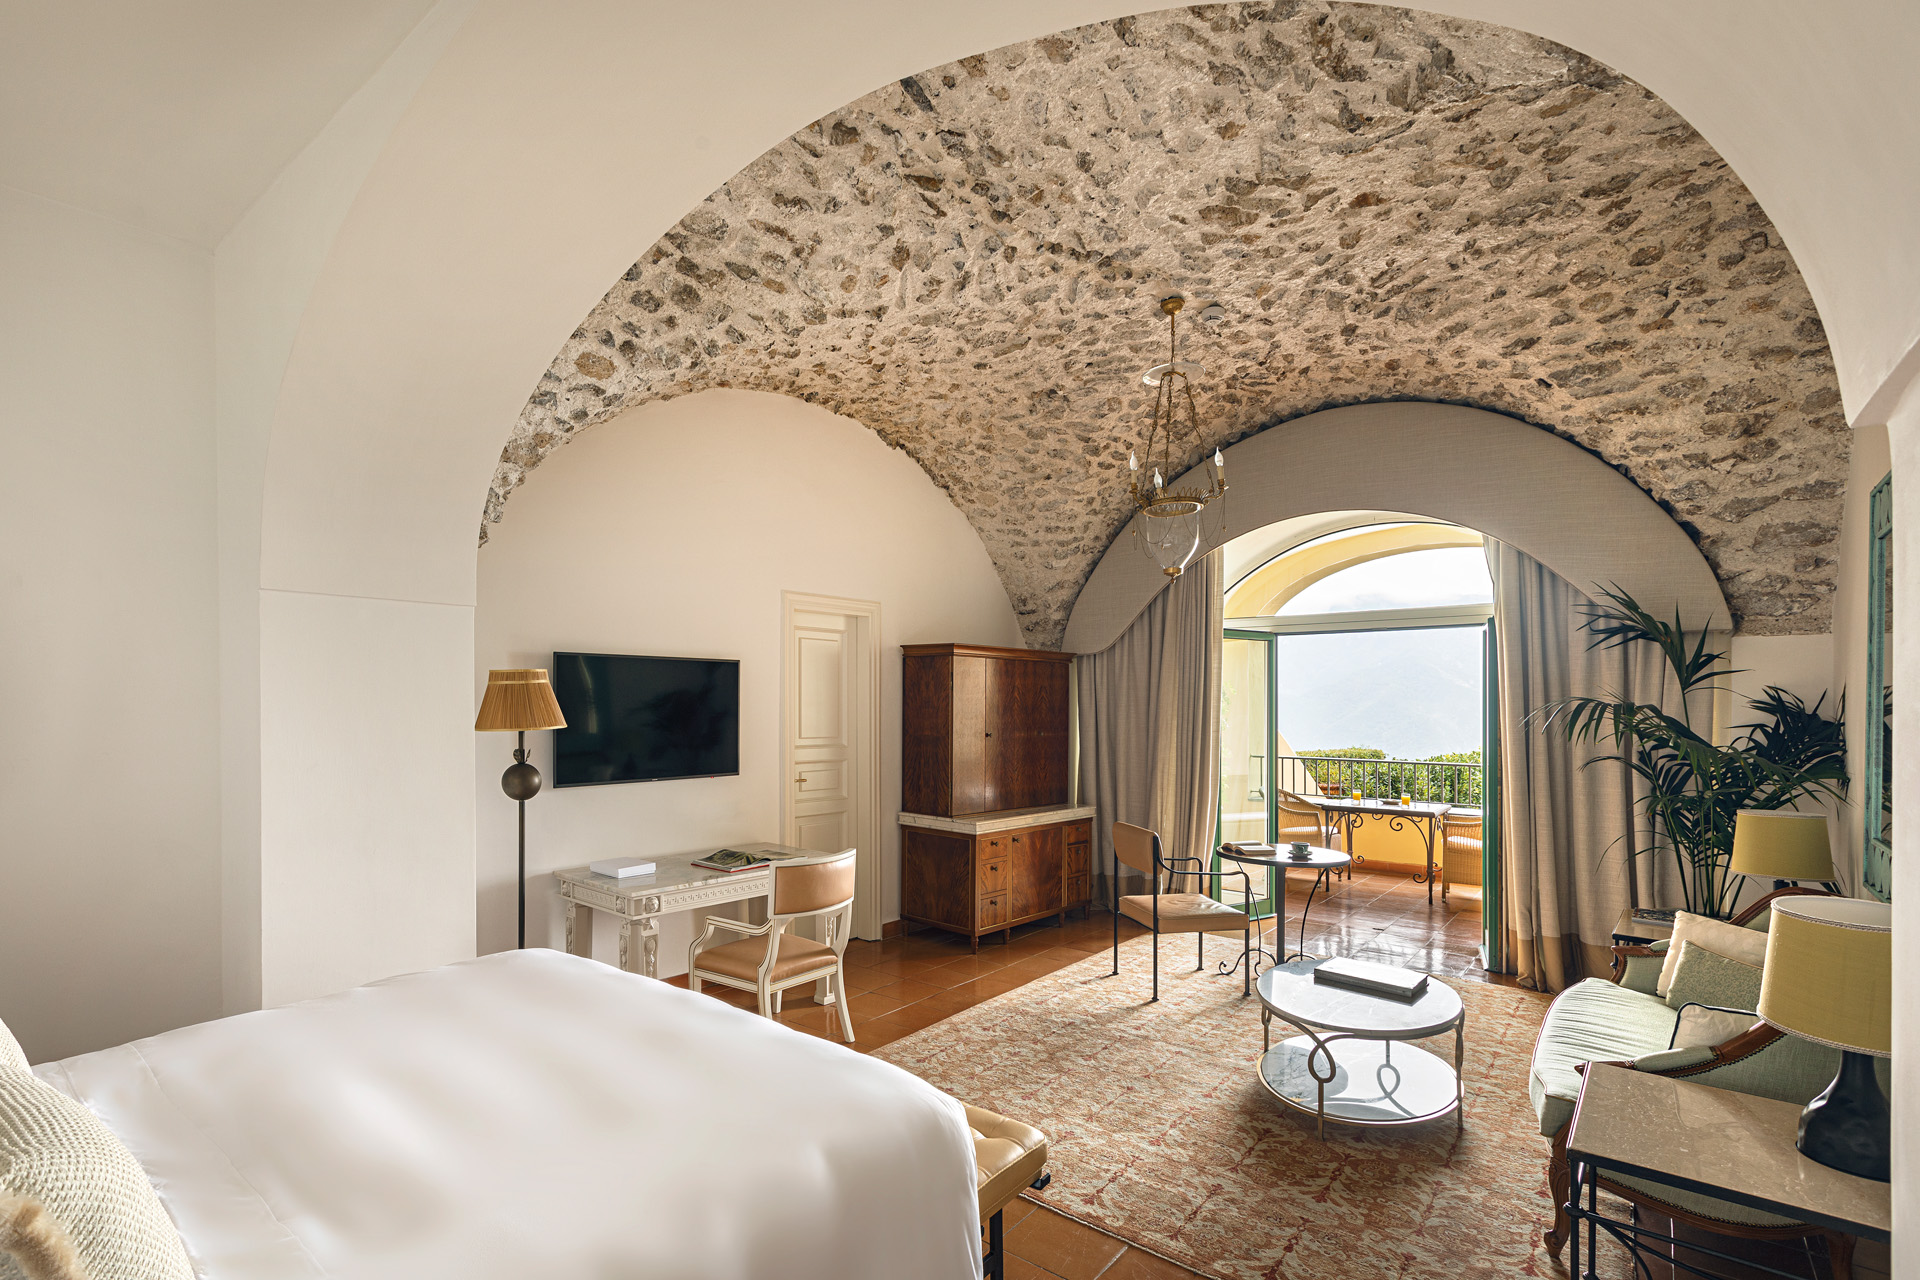 Belmond Hotel Caruso Review: What To REALLY Expect If You Stay